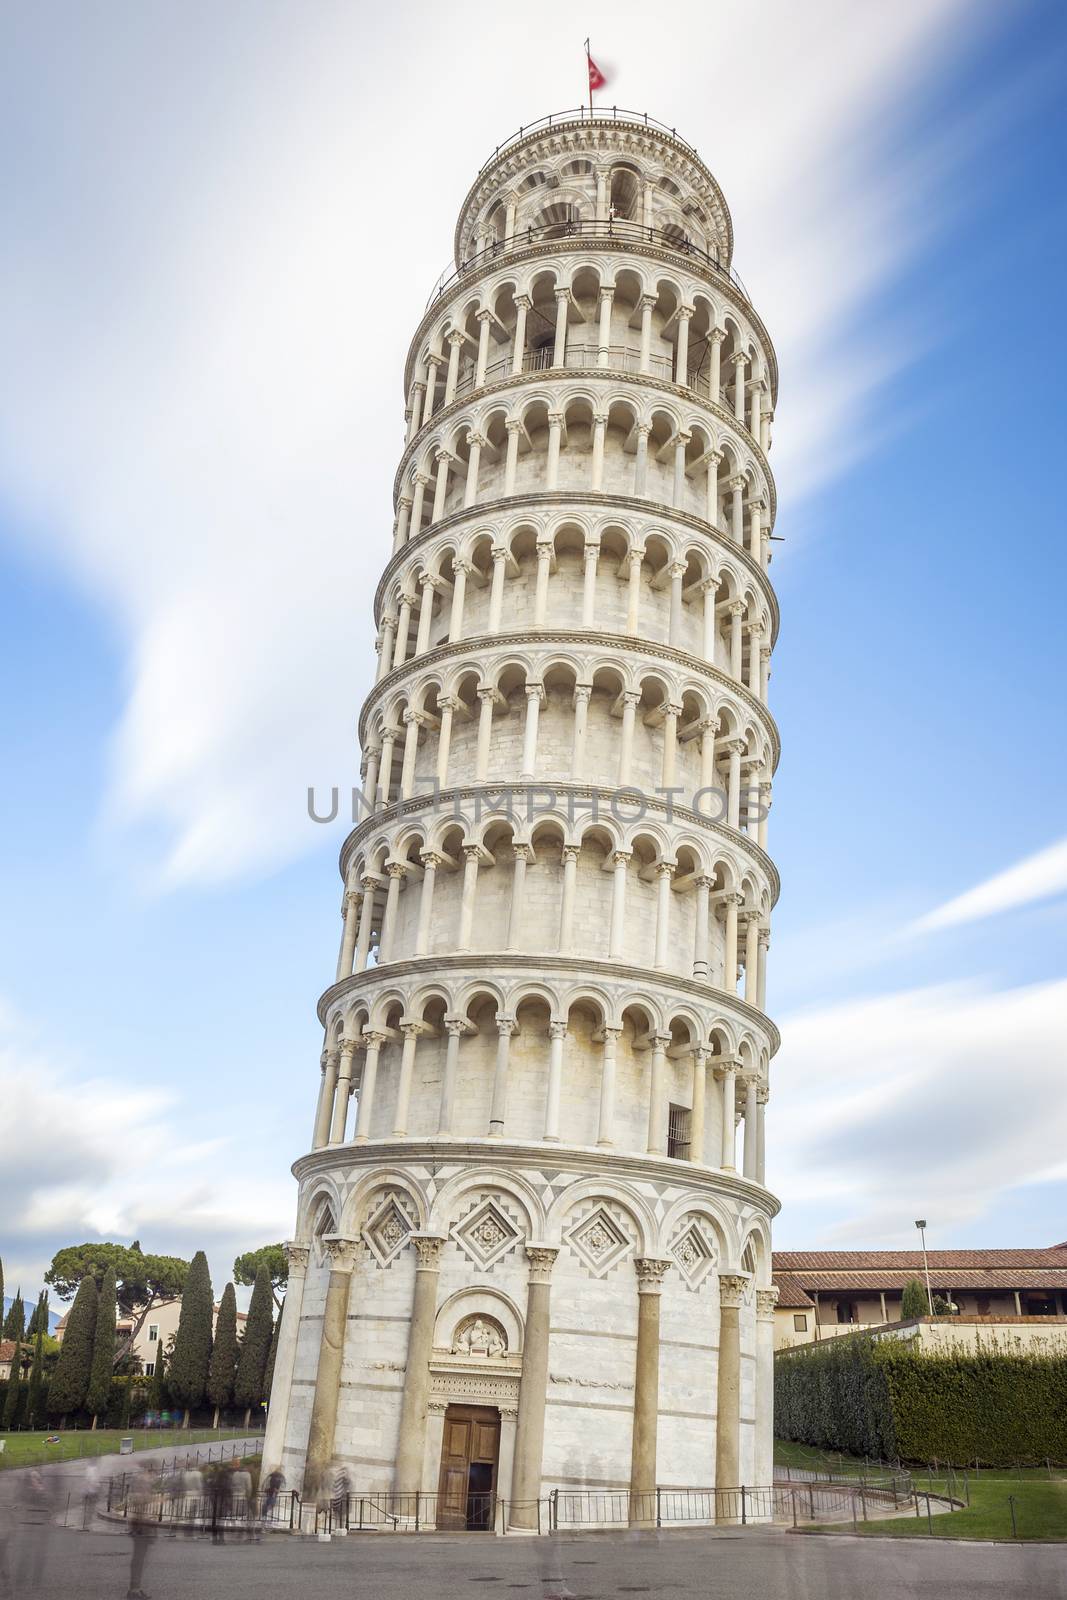 Leaning Tower of Pisa by vwalakte